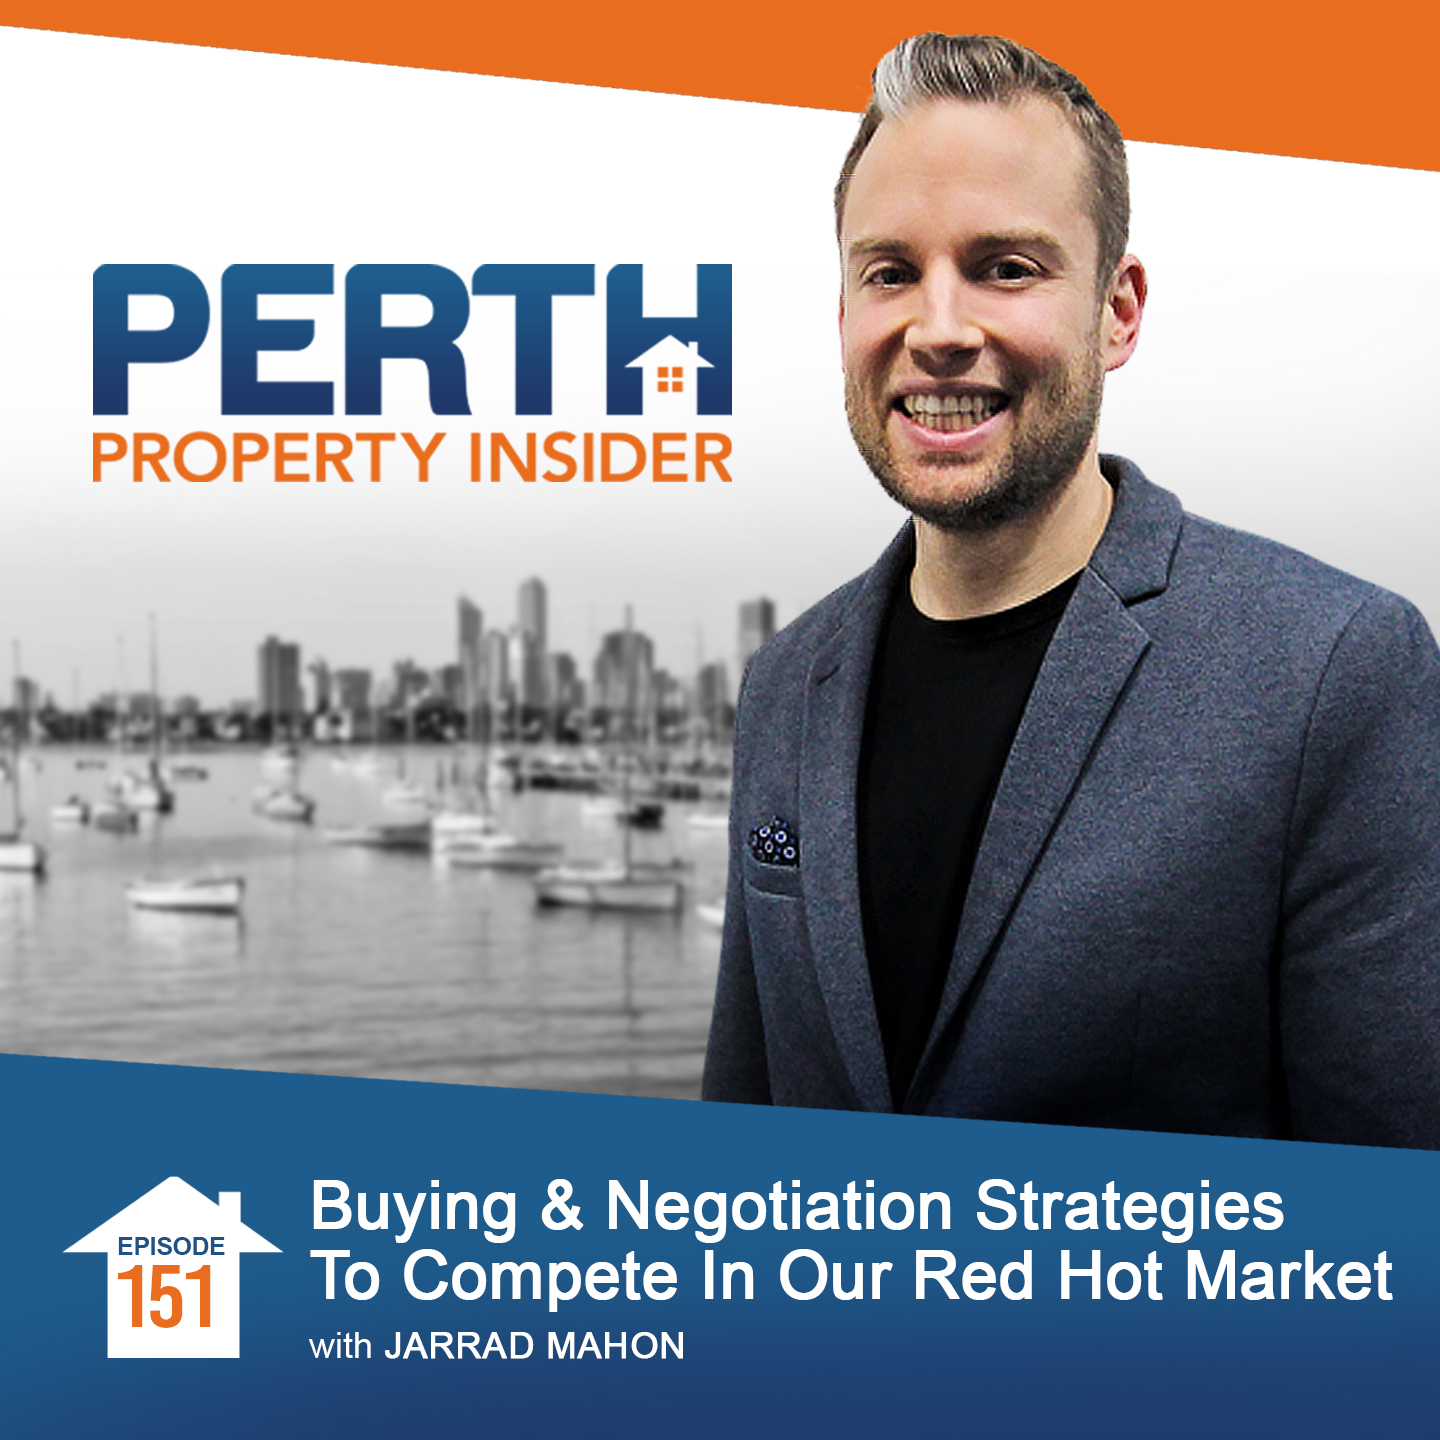 Buying & Negotiation Strategies To Compete In Our Red Hot Market